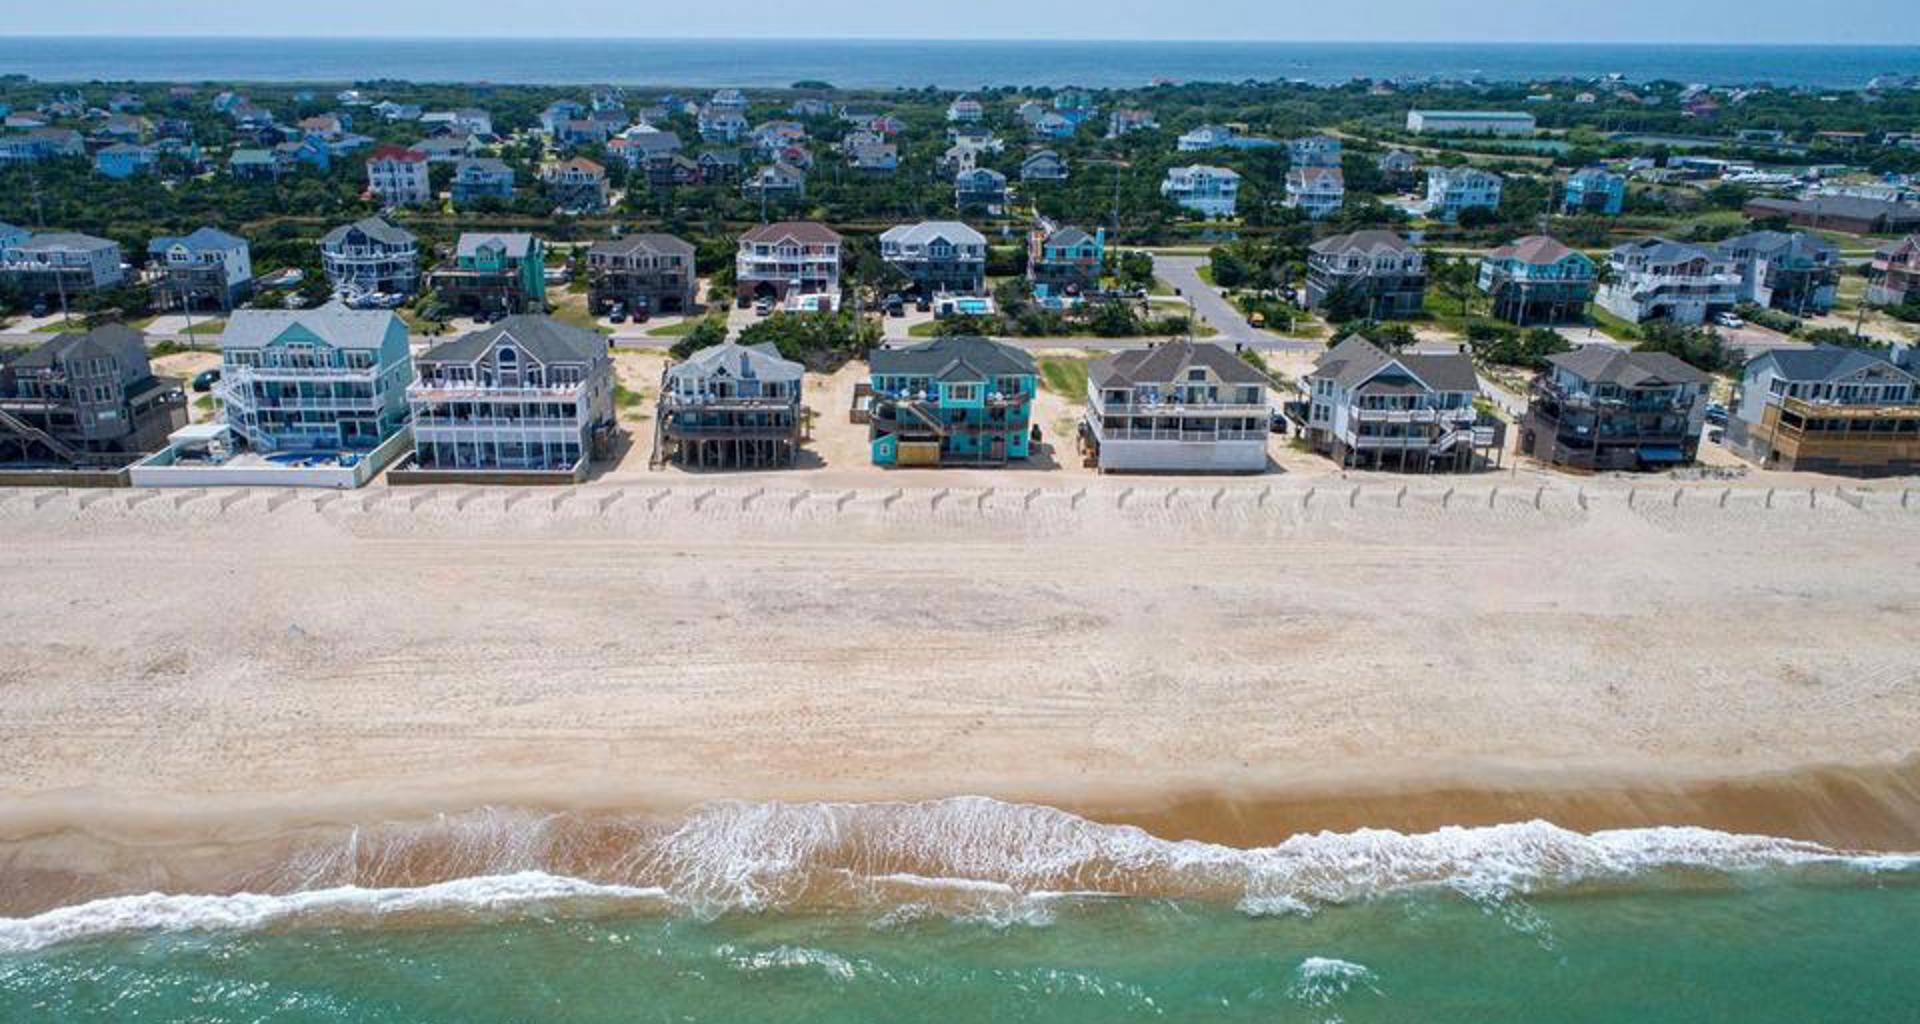 Drone view of a row of oceanfront vacation homes in Avon on Hatteras Island with the ocean in the foreground